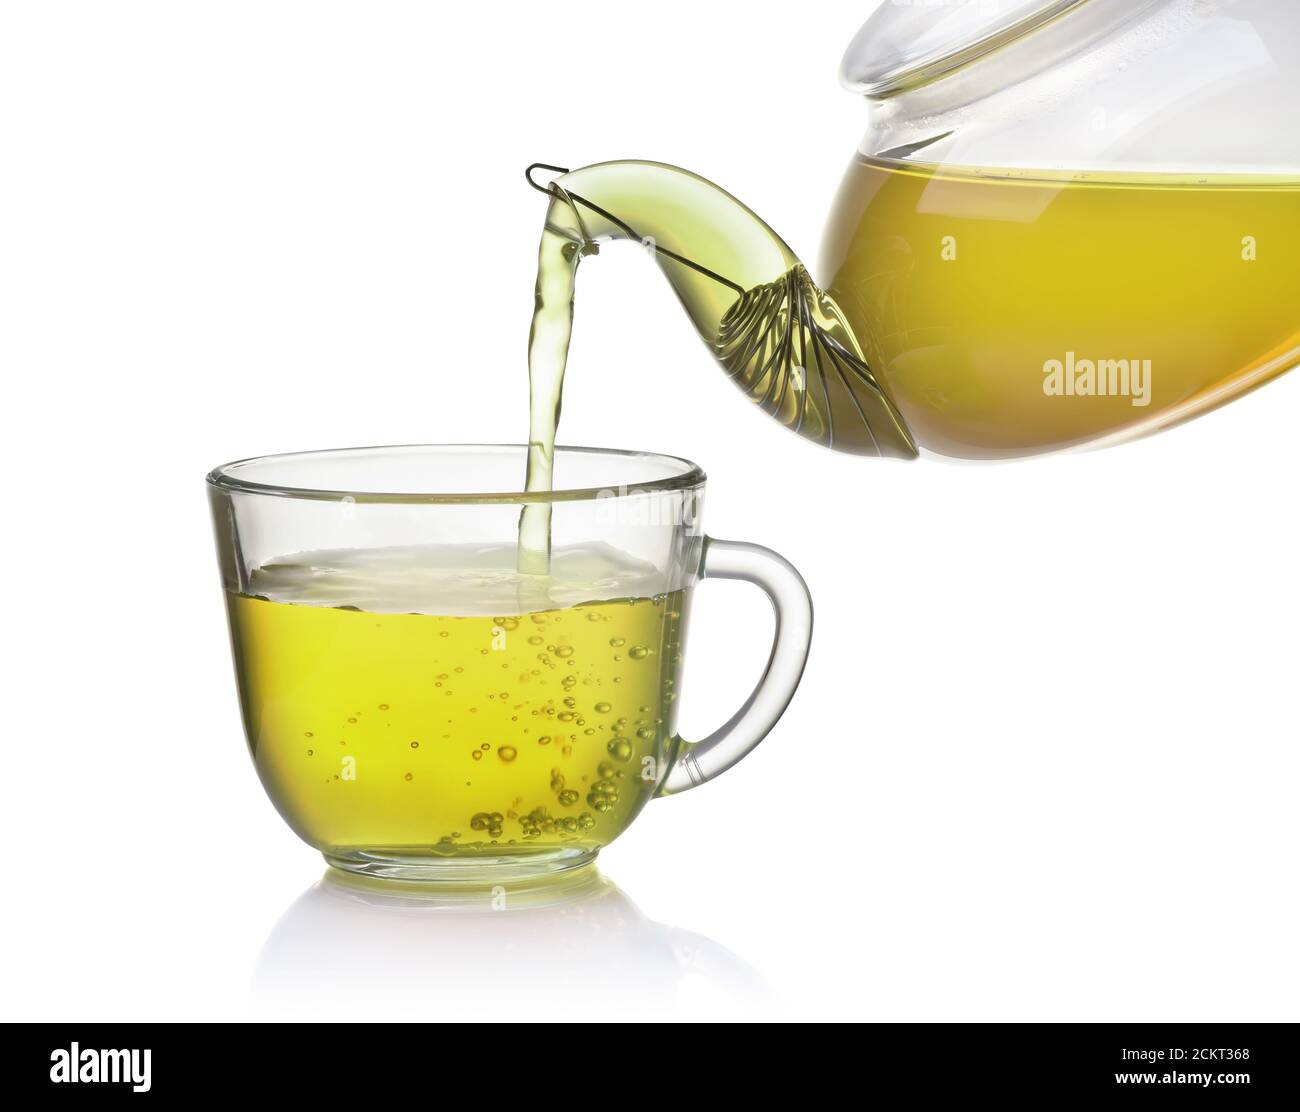 https://c8.alamy.com/comp/2CKT368/tea-pouring-from-teapot-into-glass-cup-isolated-in-white-2CKT368.jpg